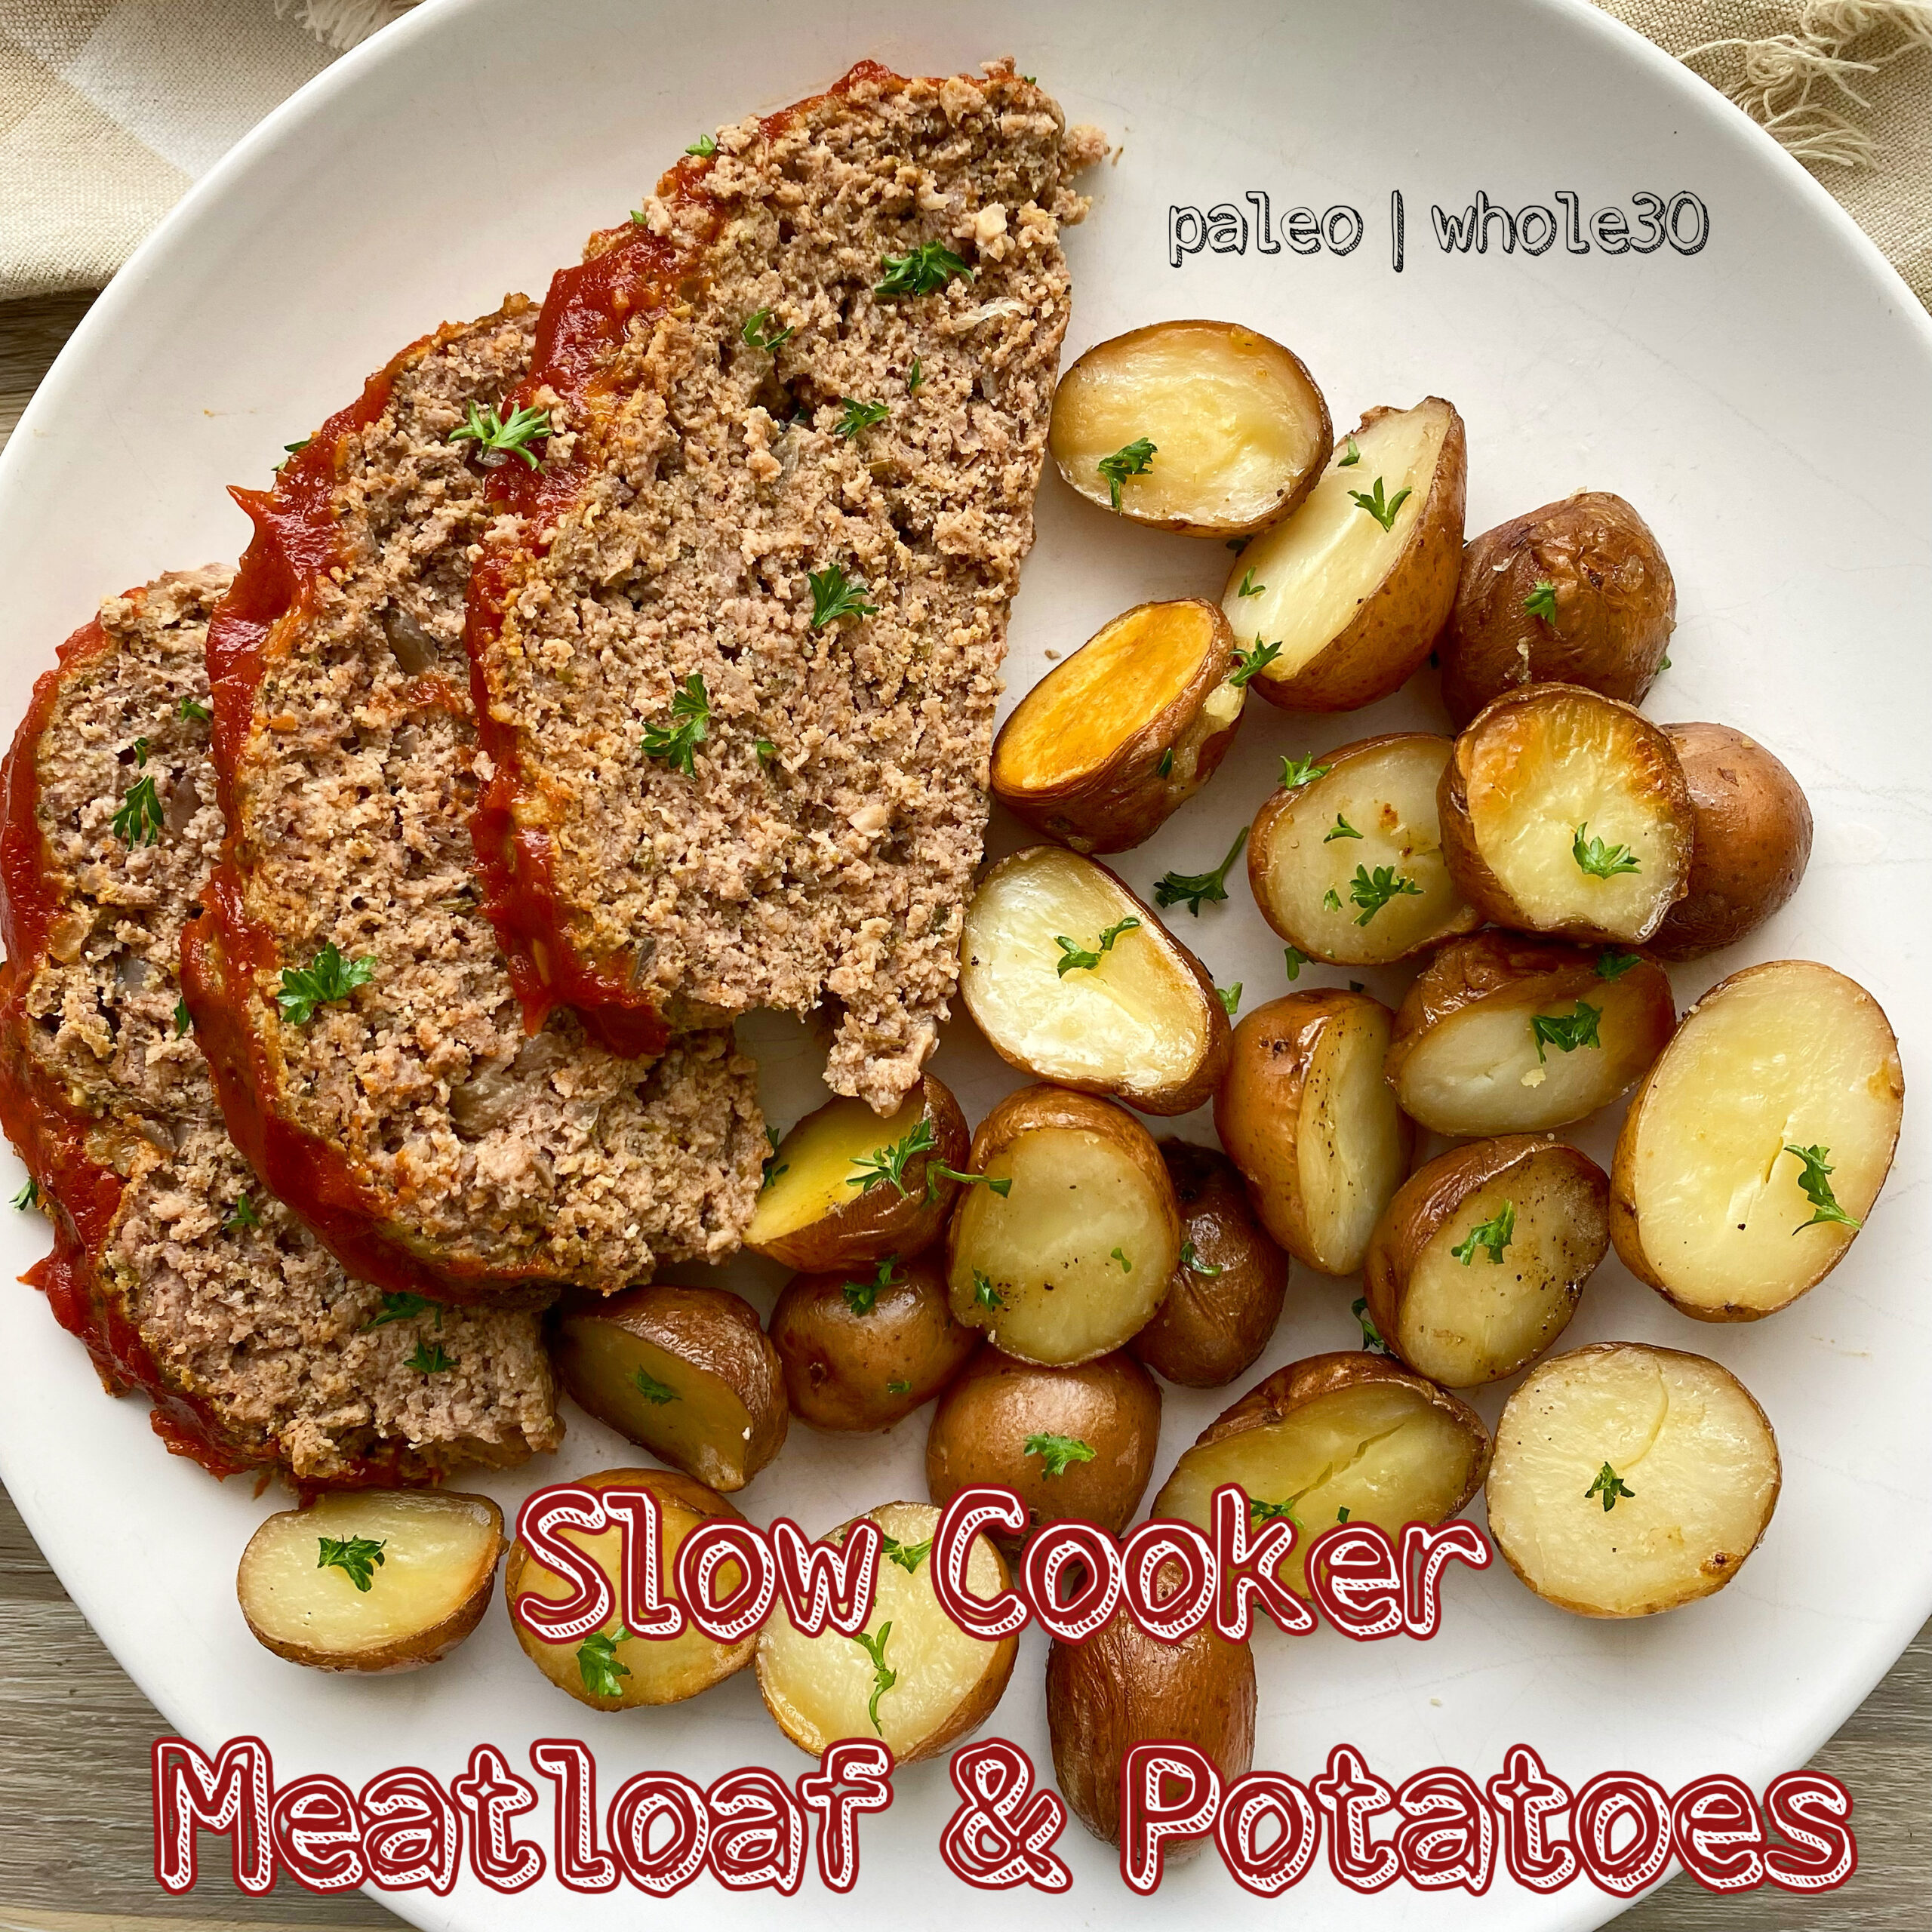 Slow Cooker Meatloaf & Potatoes (Paleo,Whole30)